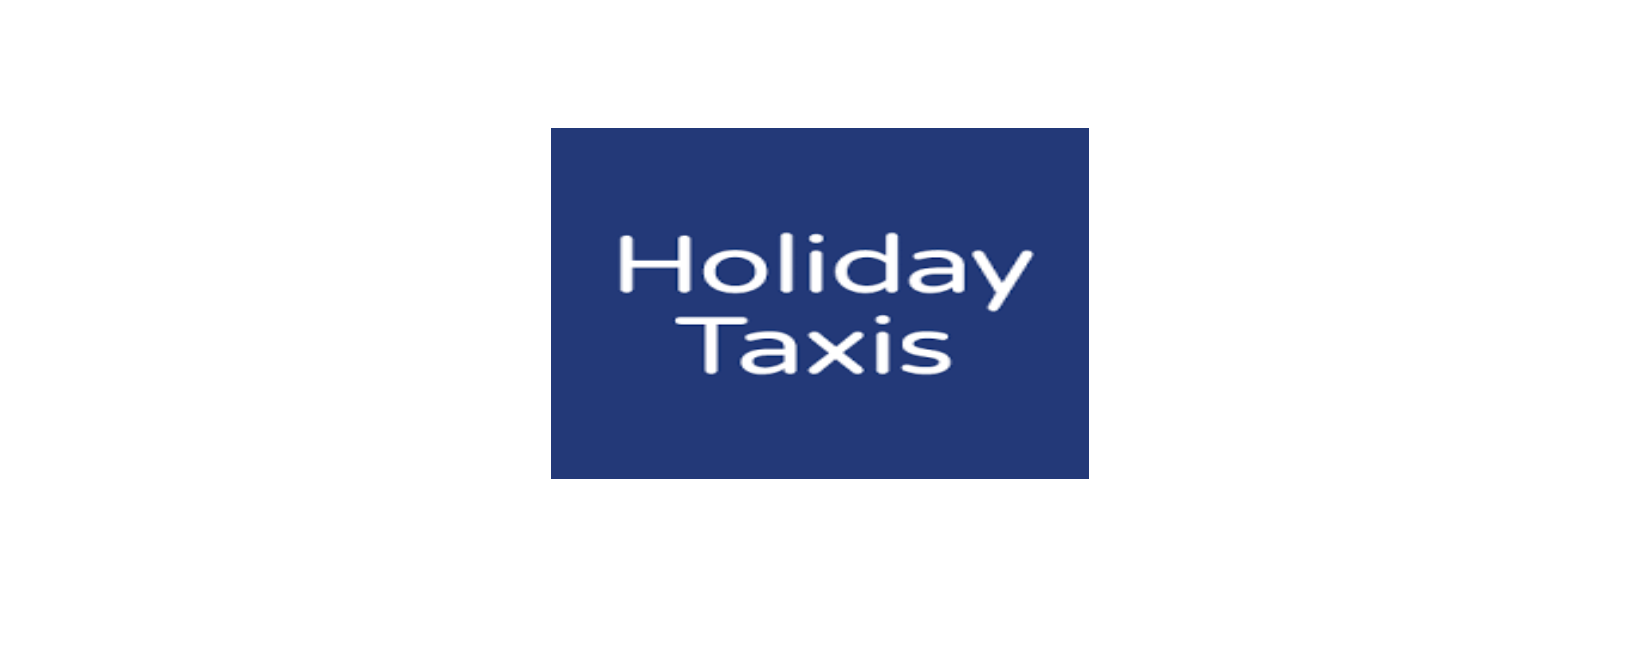 HolidayTaxis UK Discount Code 2022